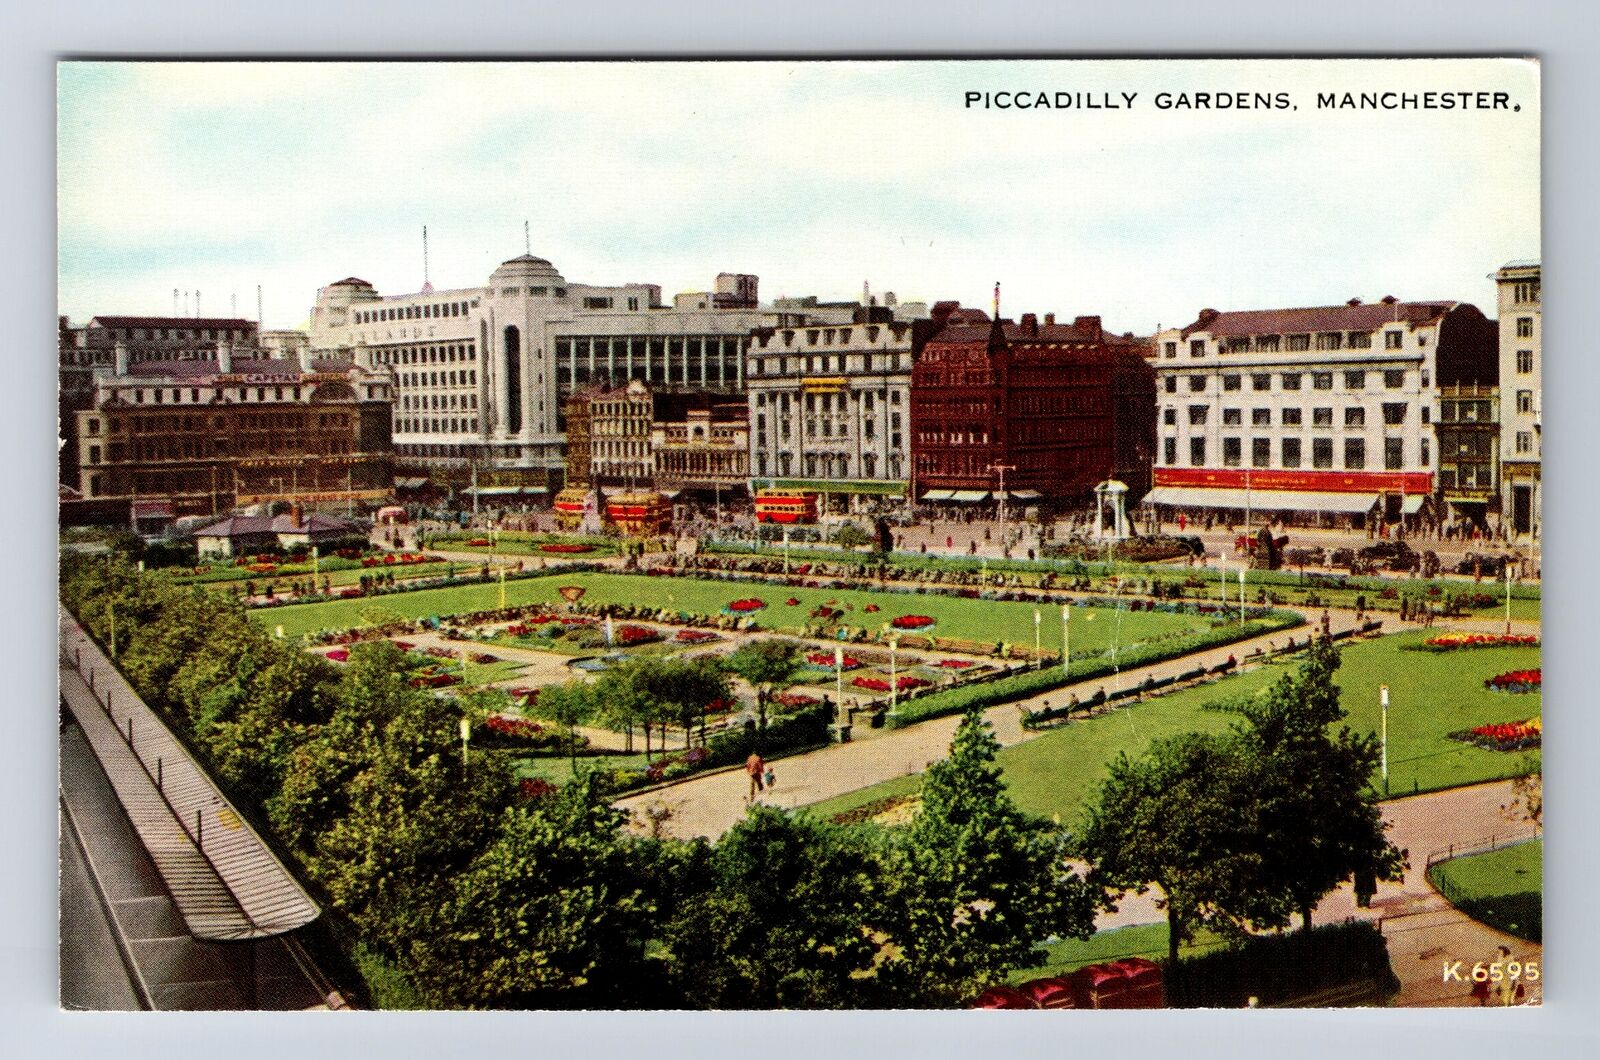 Manchester-England, Piccadilly Gardens, Fountains, Flower beds, Vintage Postcard